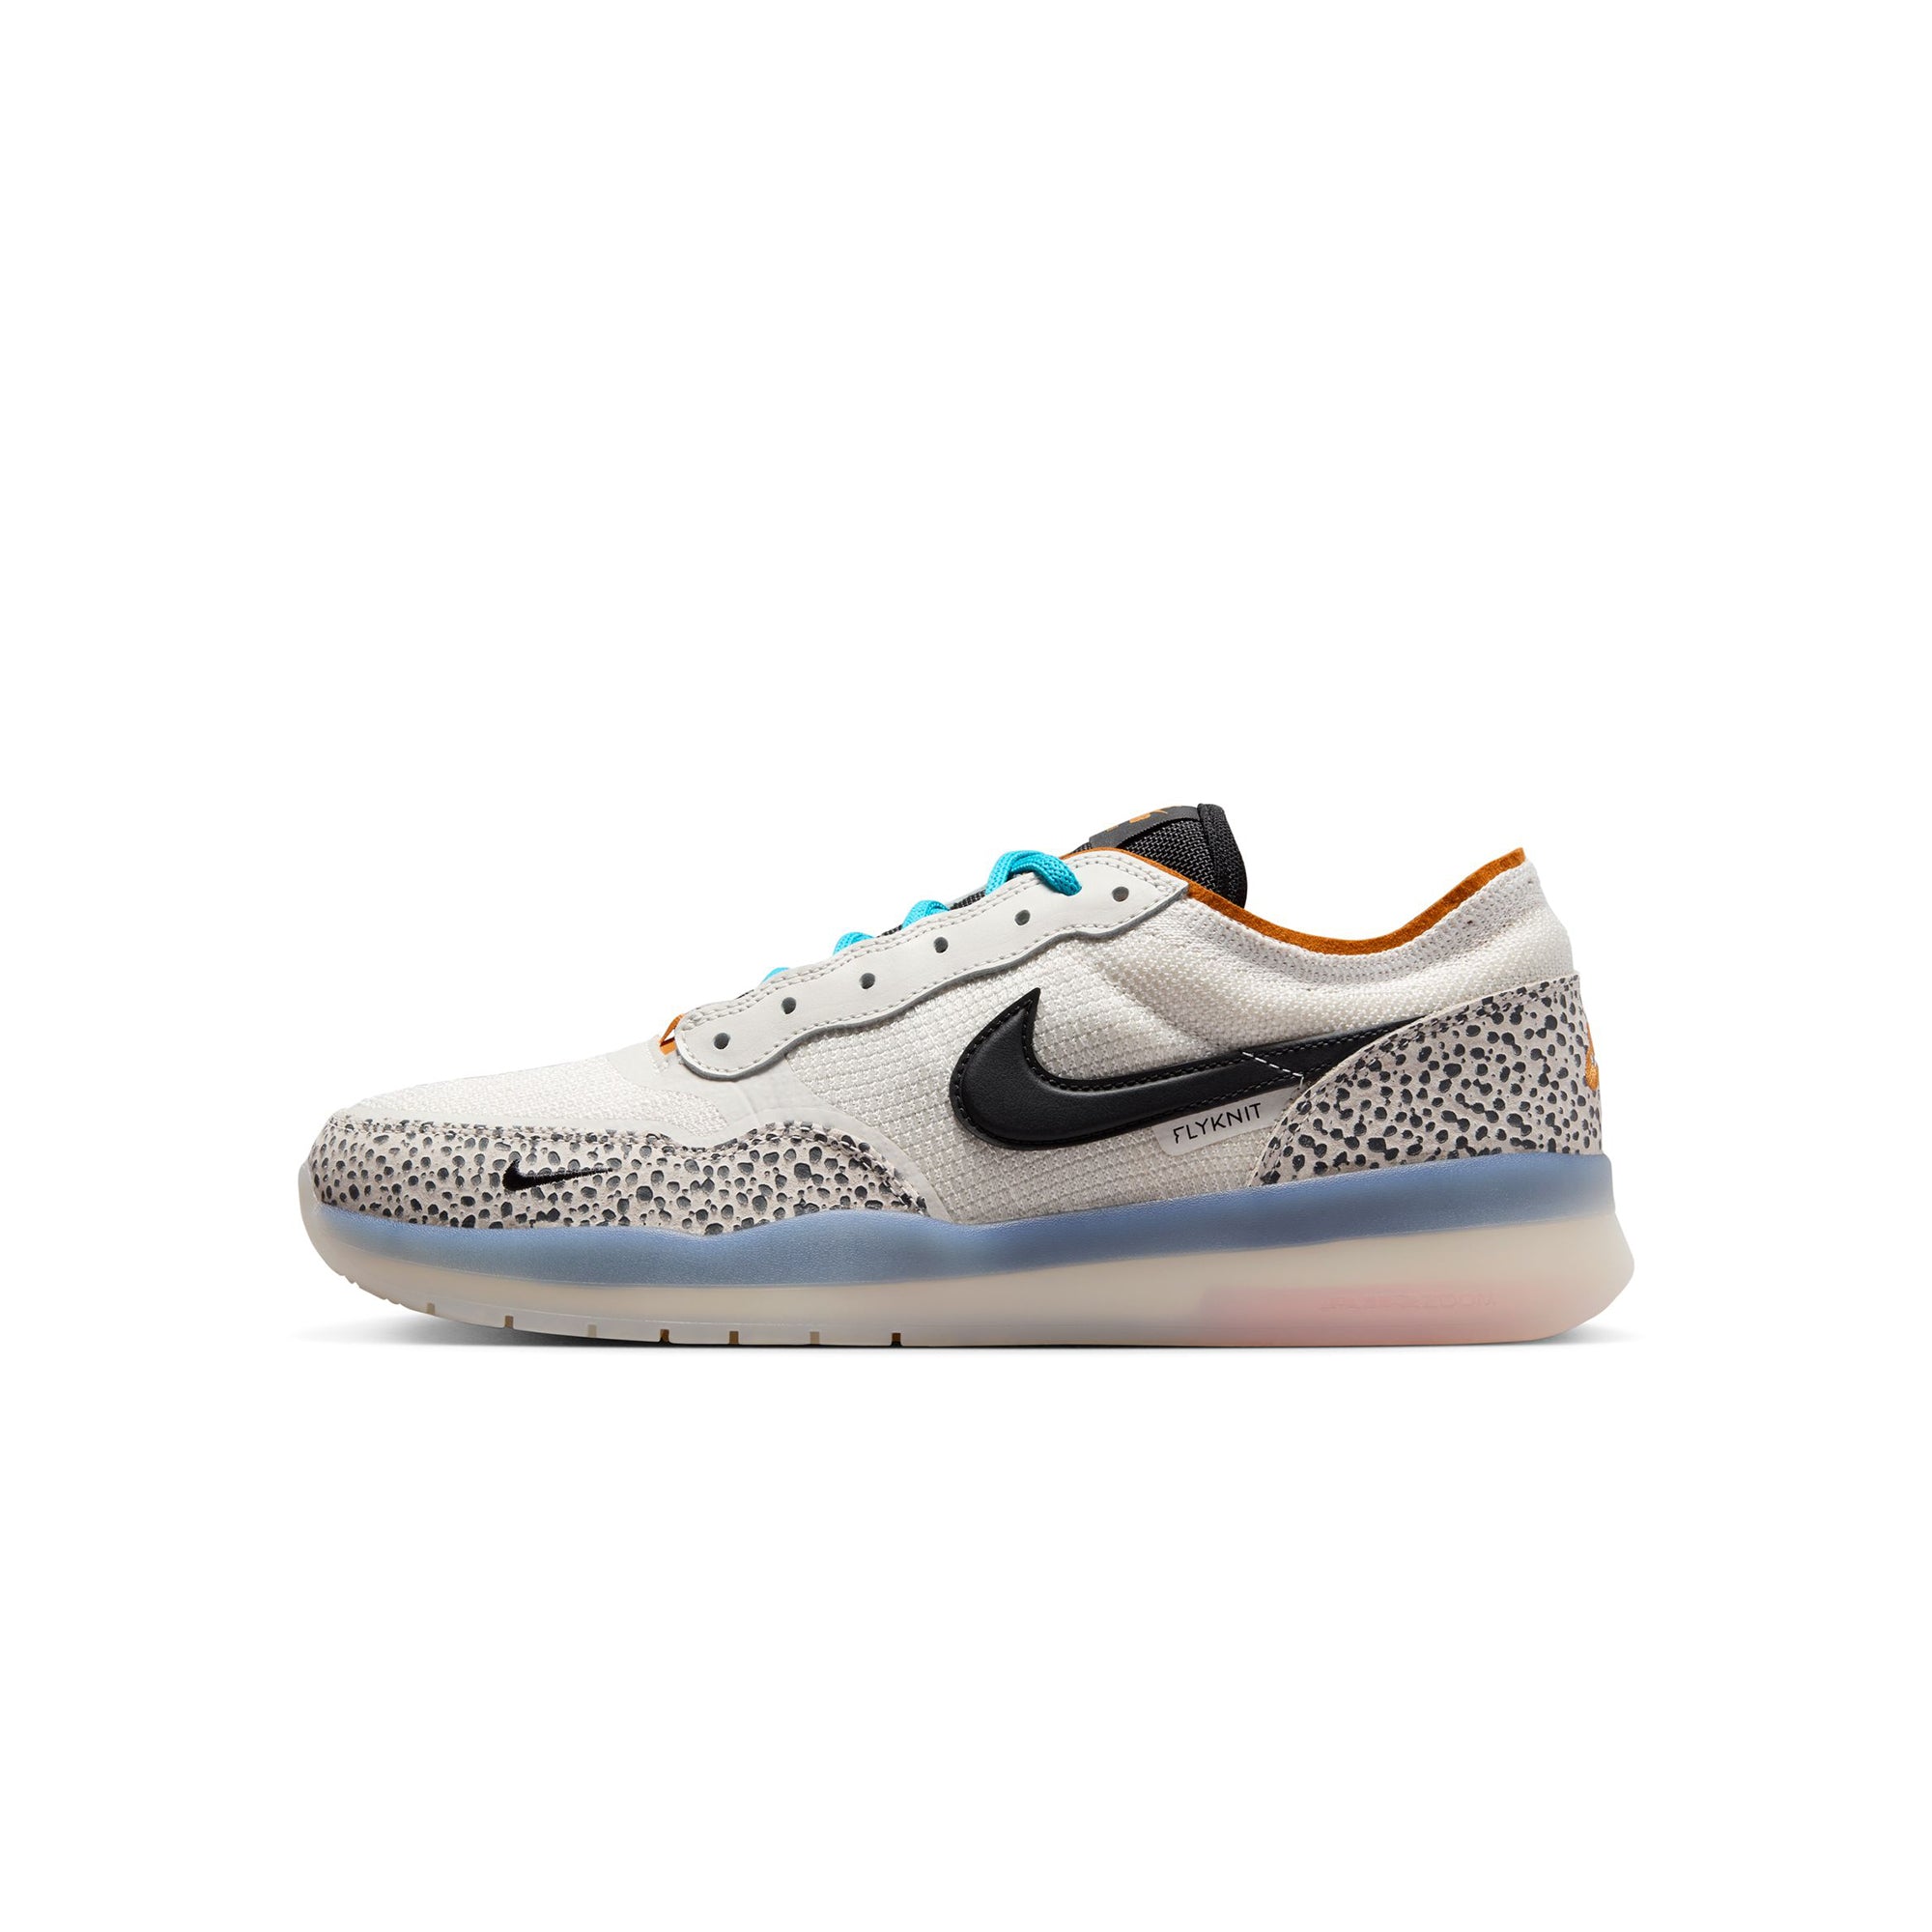 Nike SB Mens PS8 Electric Shoes card image